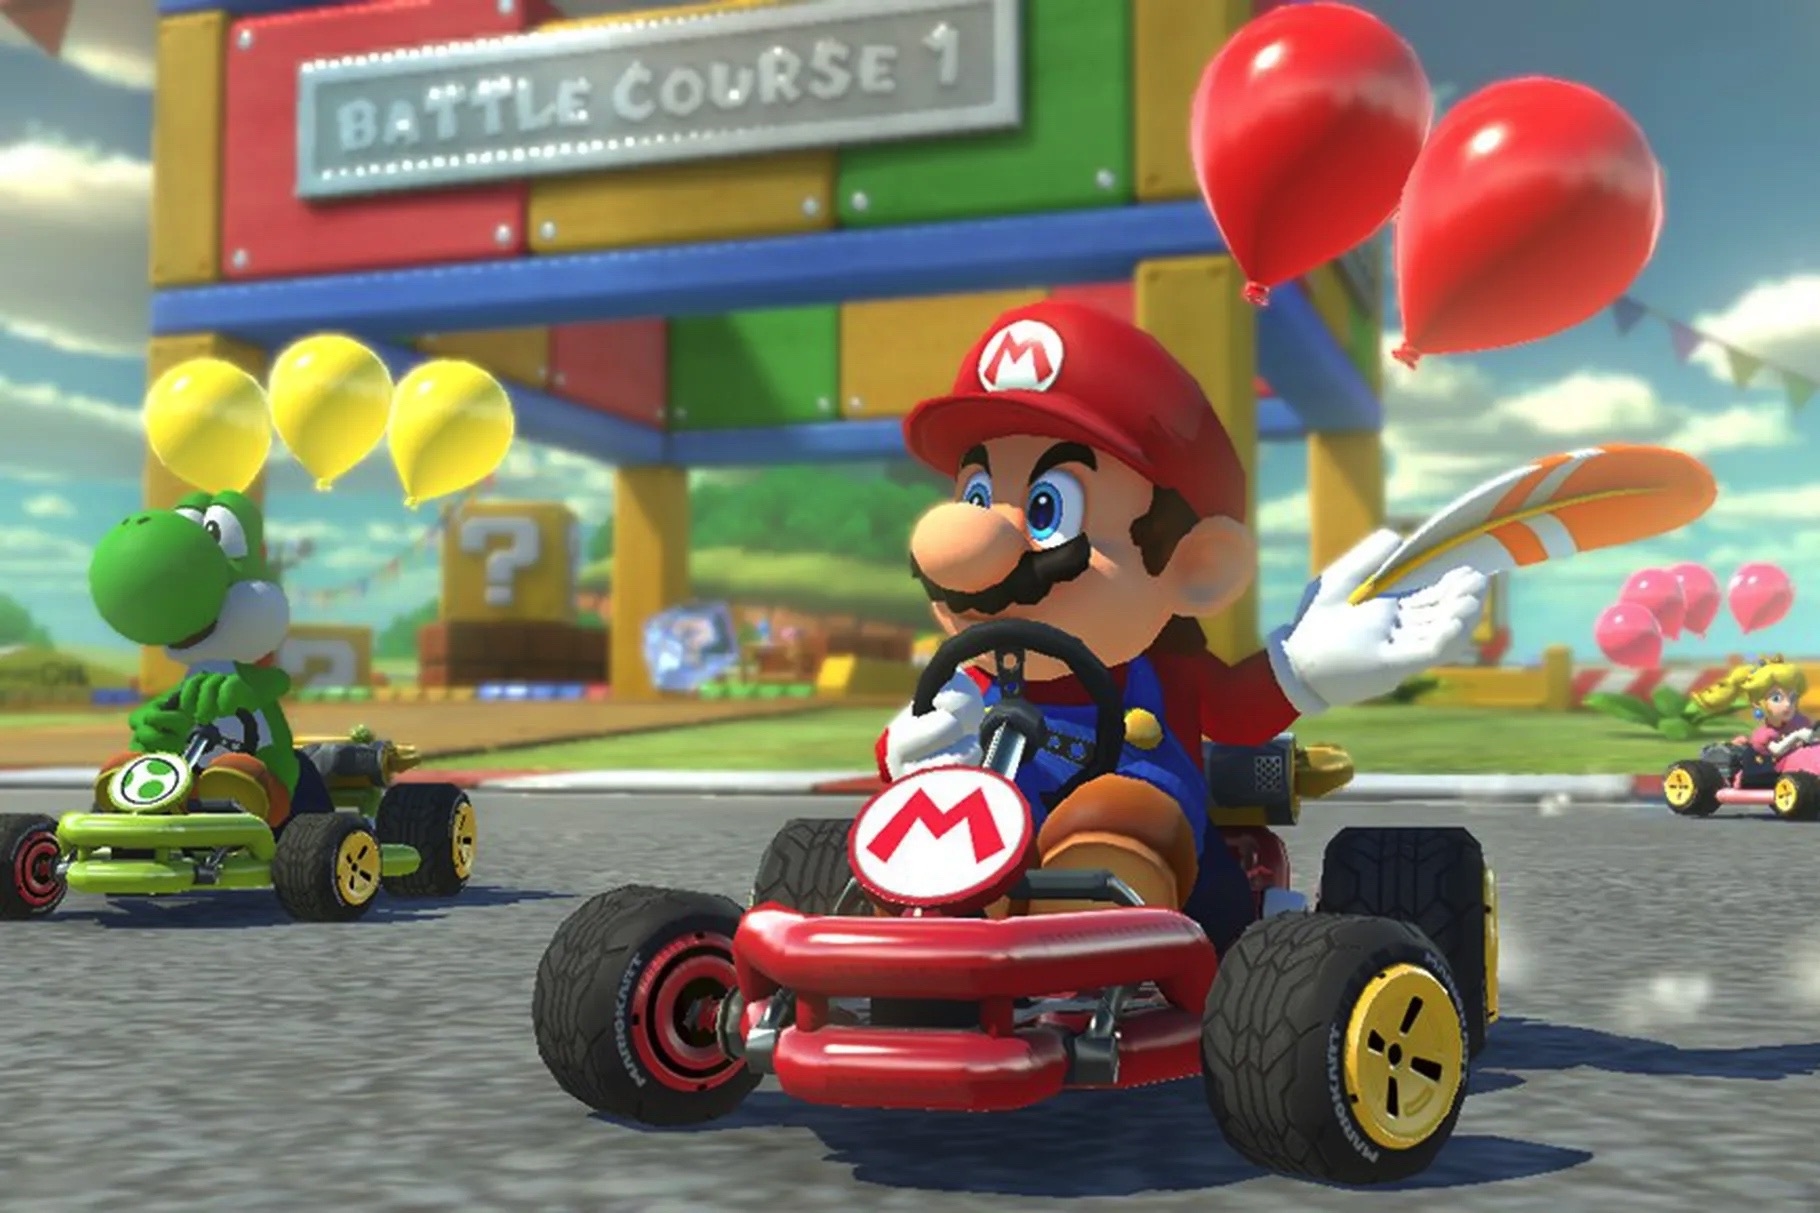 ‘Mario Kart’ is 30 years old, if you can believe that | DeviceDaily.com